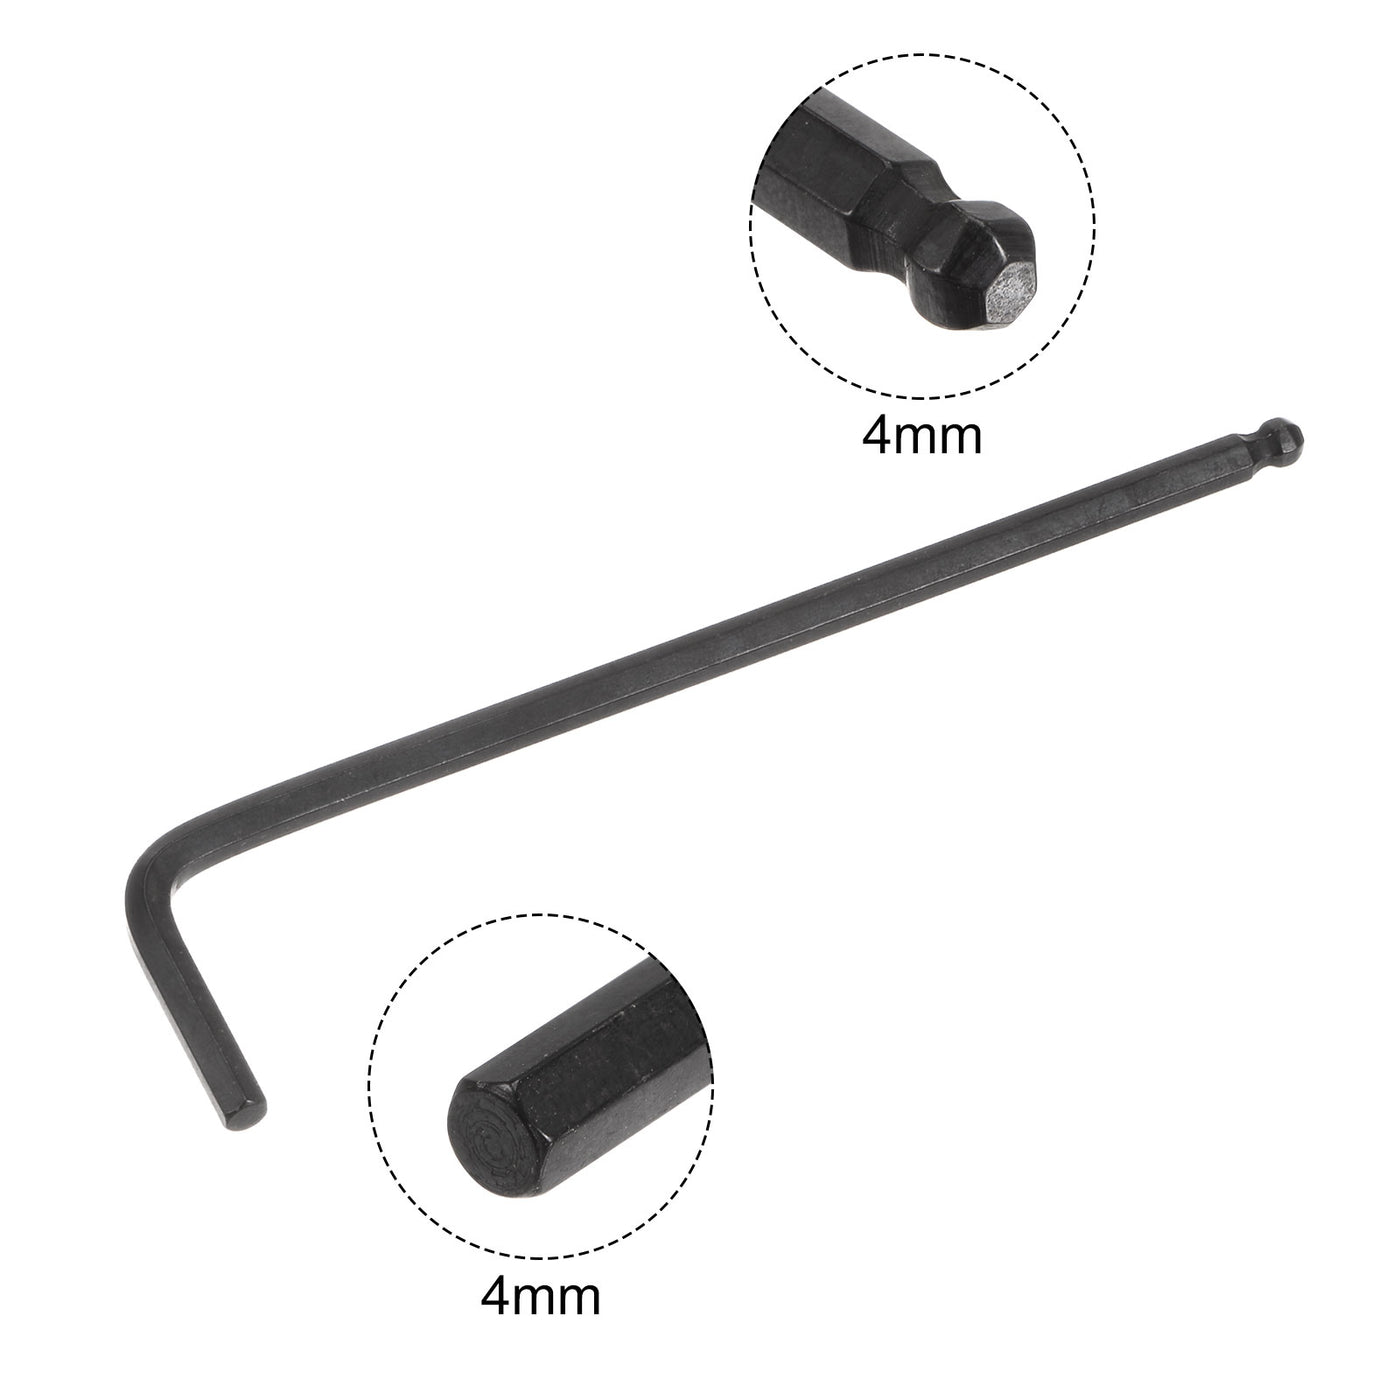 uxcell Uxcell 4mm Ball End Hex Key Wrench, L Shaped Long Arm CR-V Repairing Tool, Black